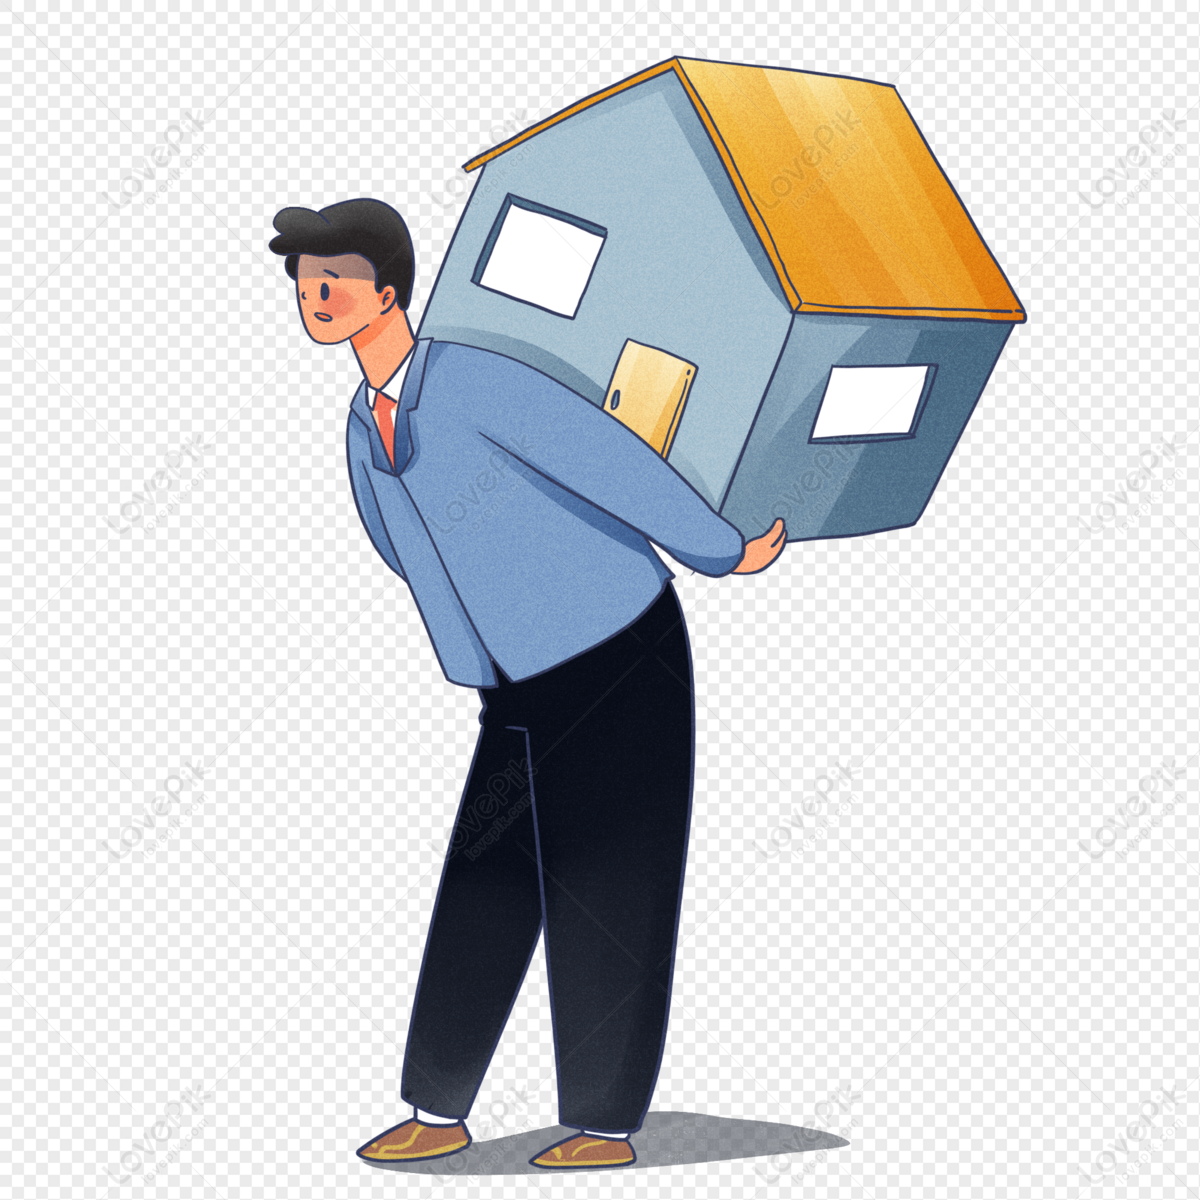 Mortgage Images Clipart